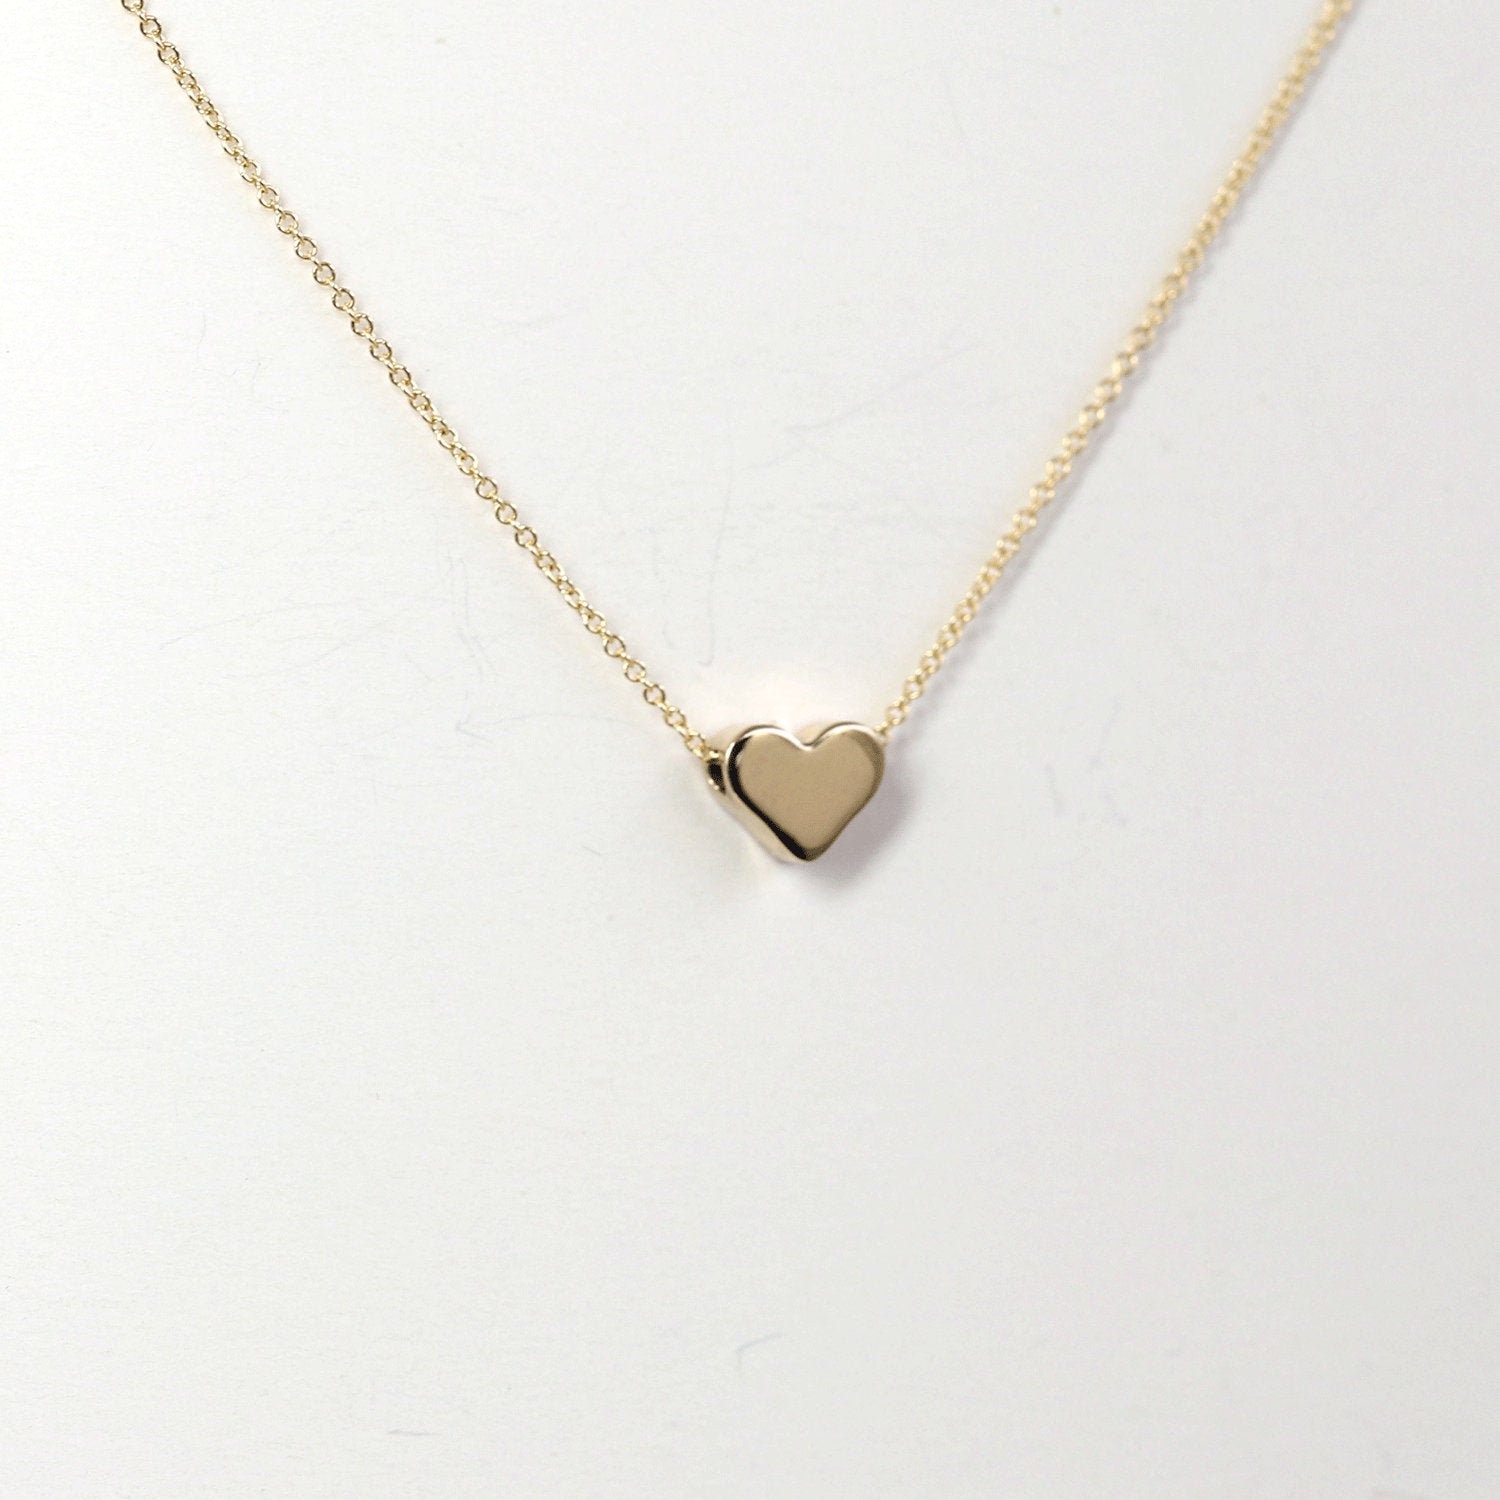 Awvialy Cute Heart Necklace Dainty Gold Heart Necklace 14K Gold Plated Minimalist Heart Necklace Small Love Heart Pendant Necklace Simple Gold